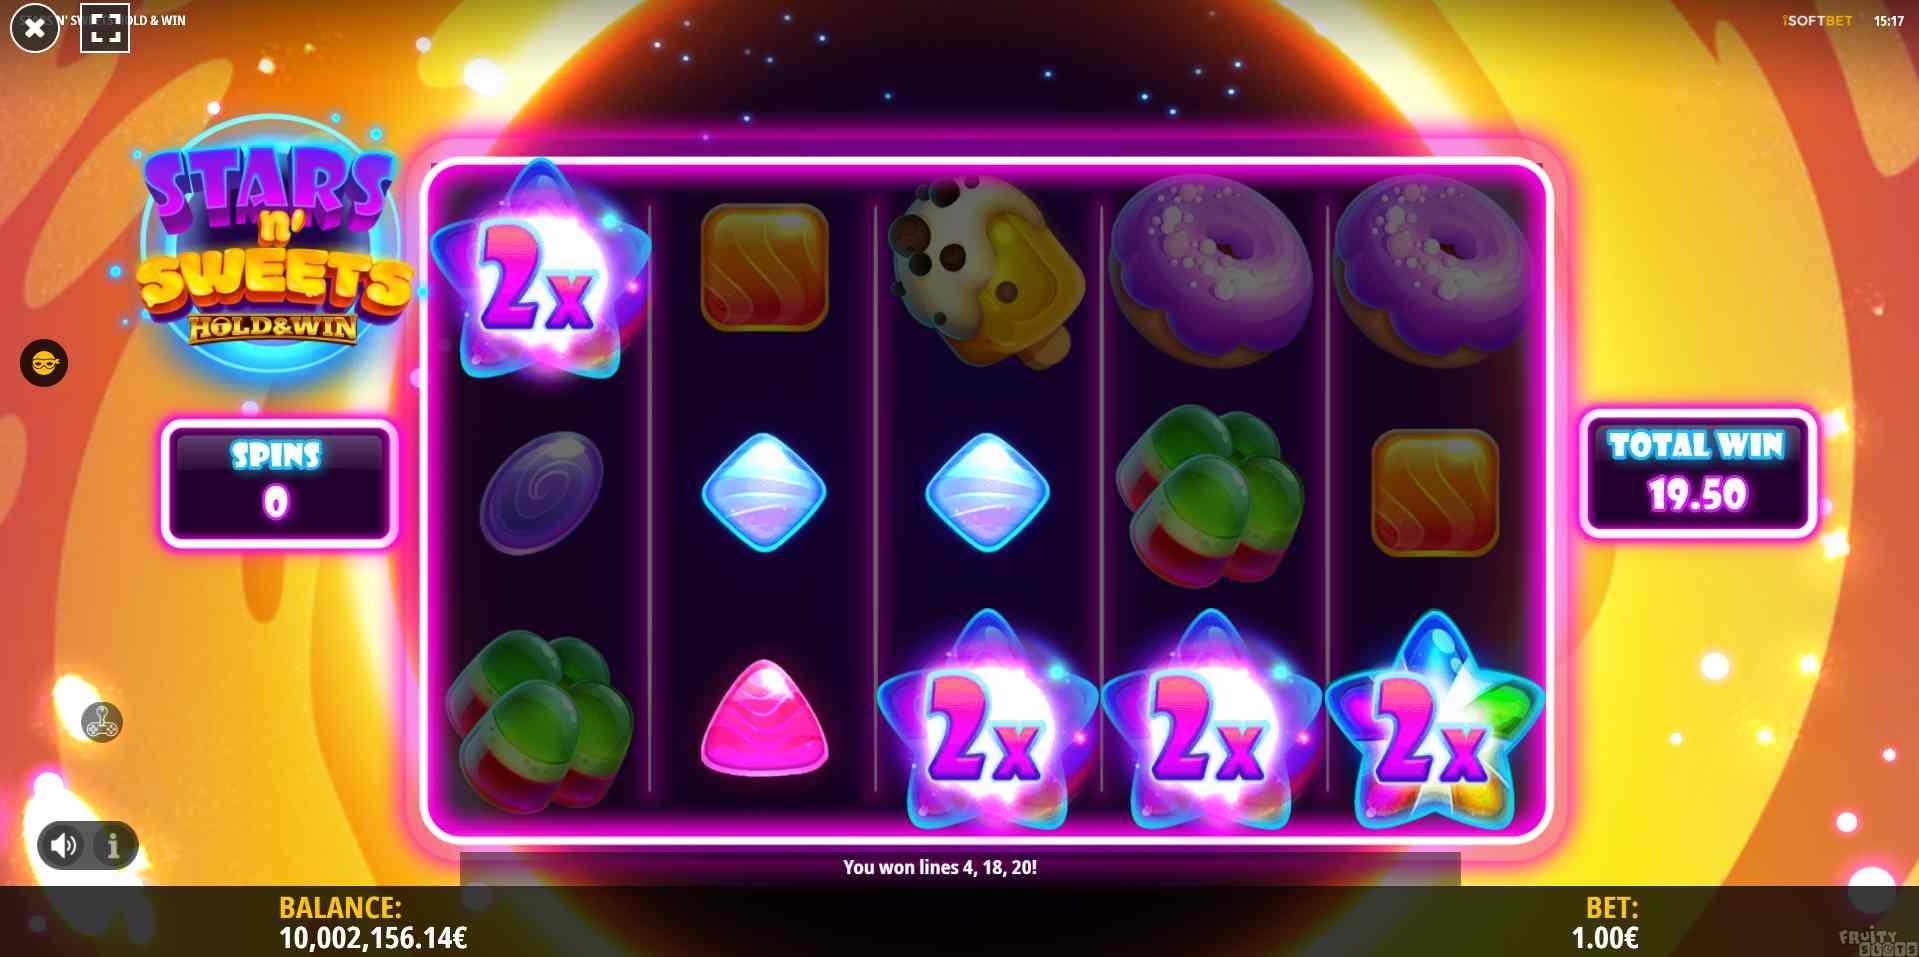 Stars n' Sweets Hold & Win Free Spins